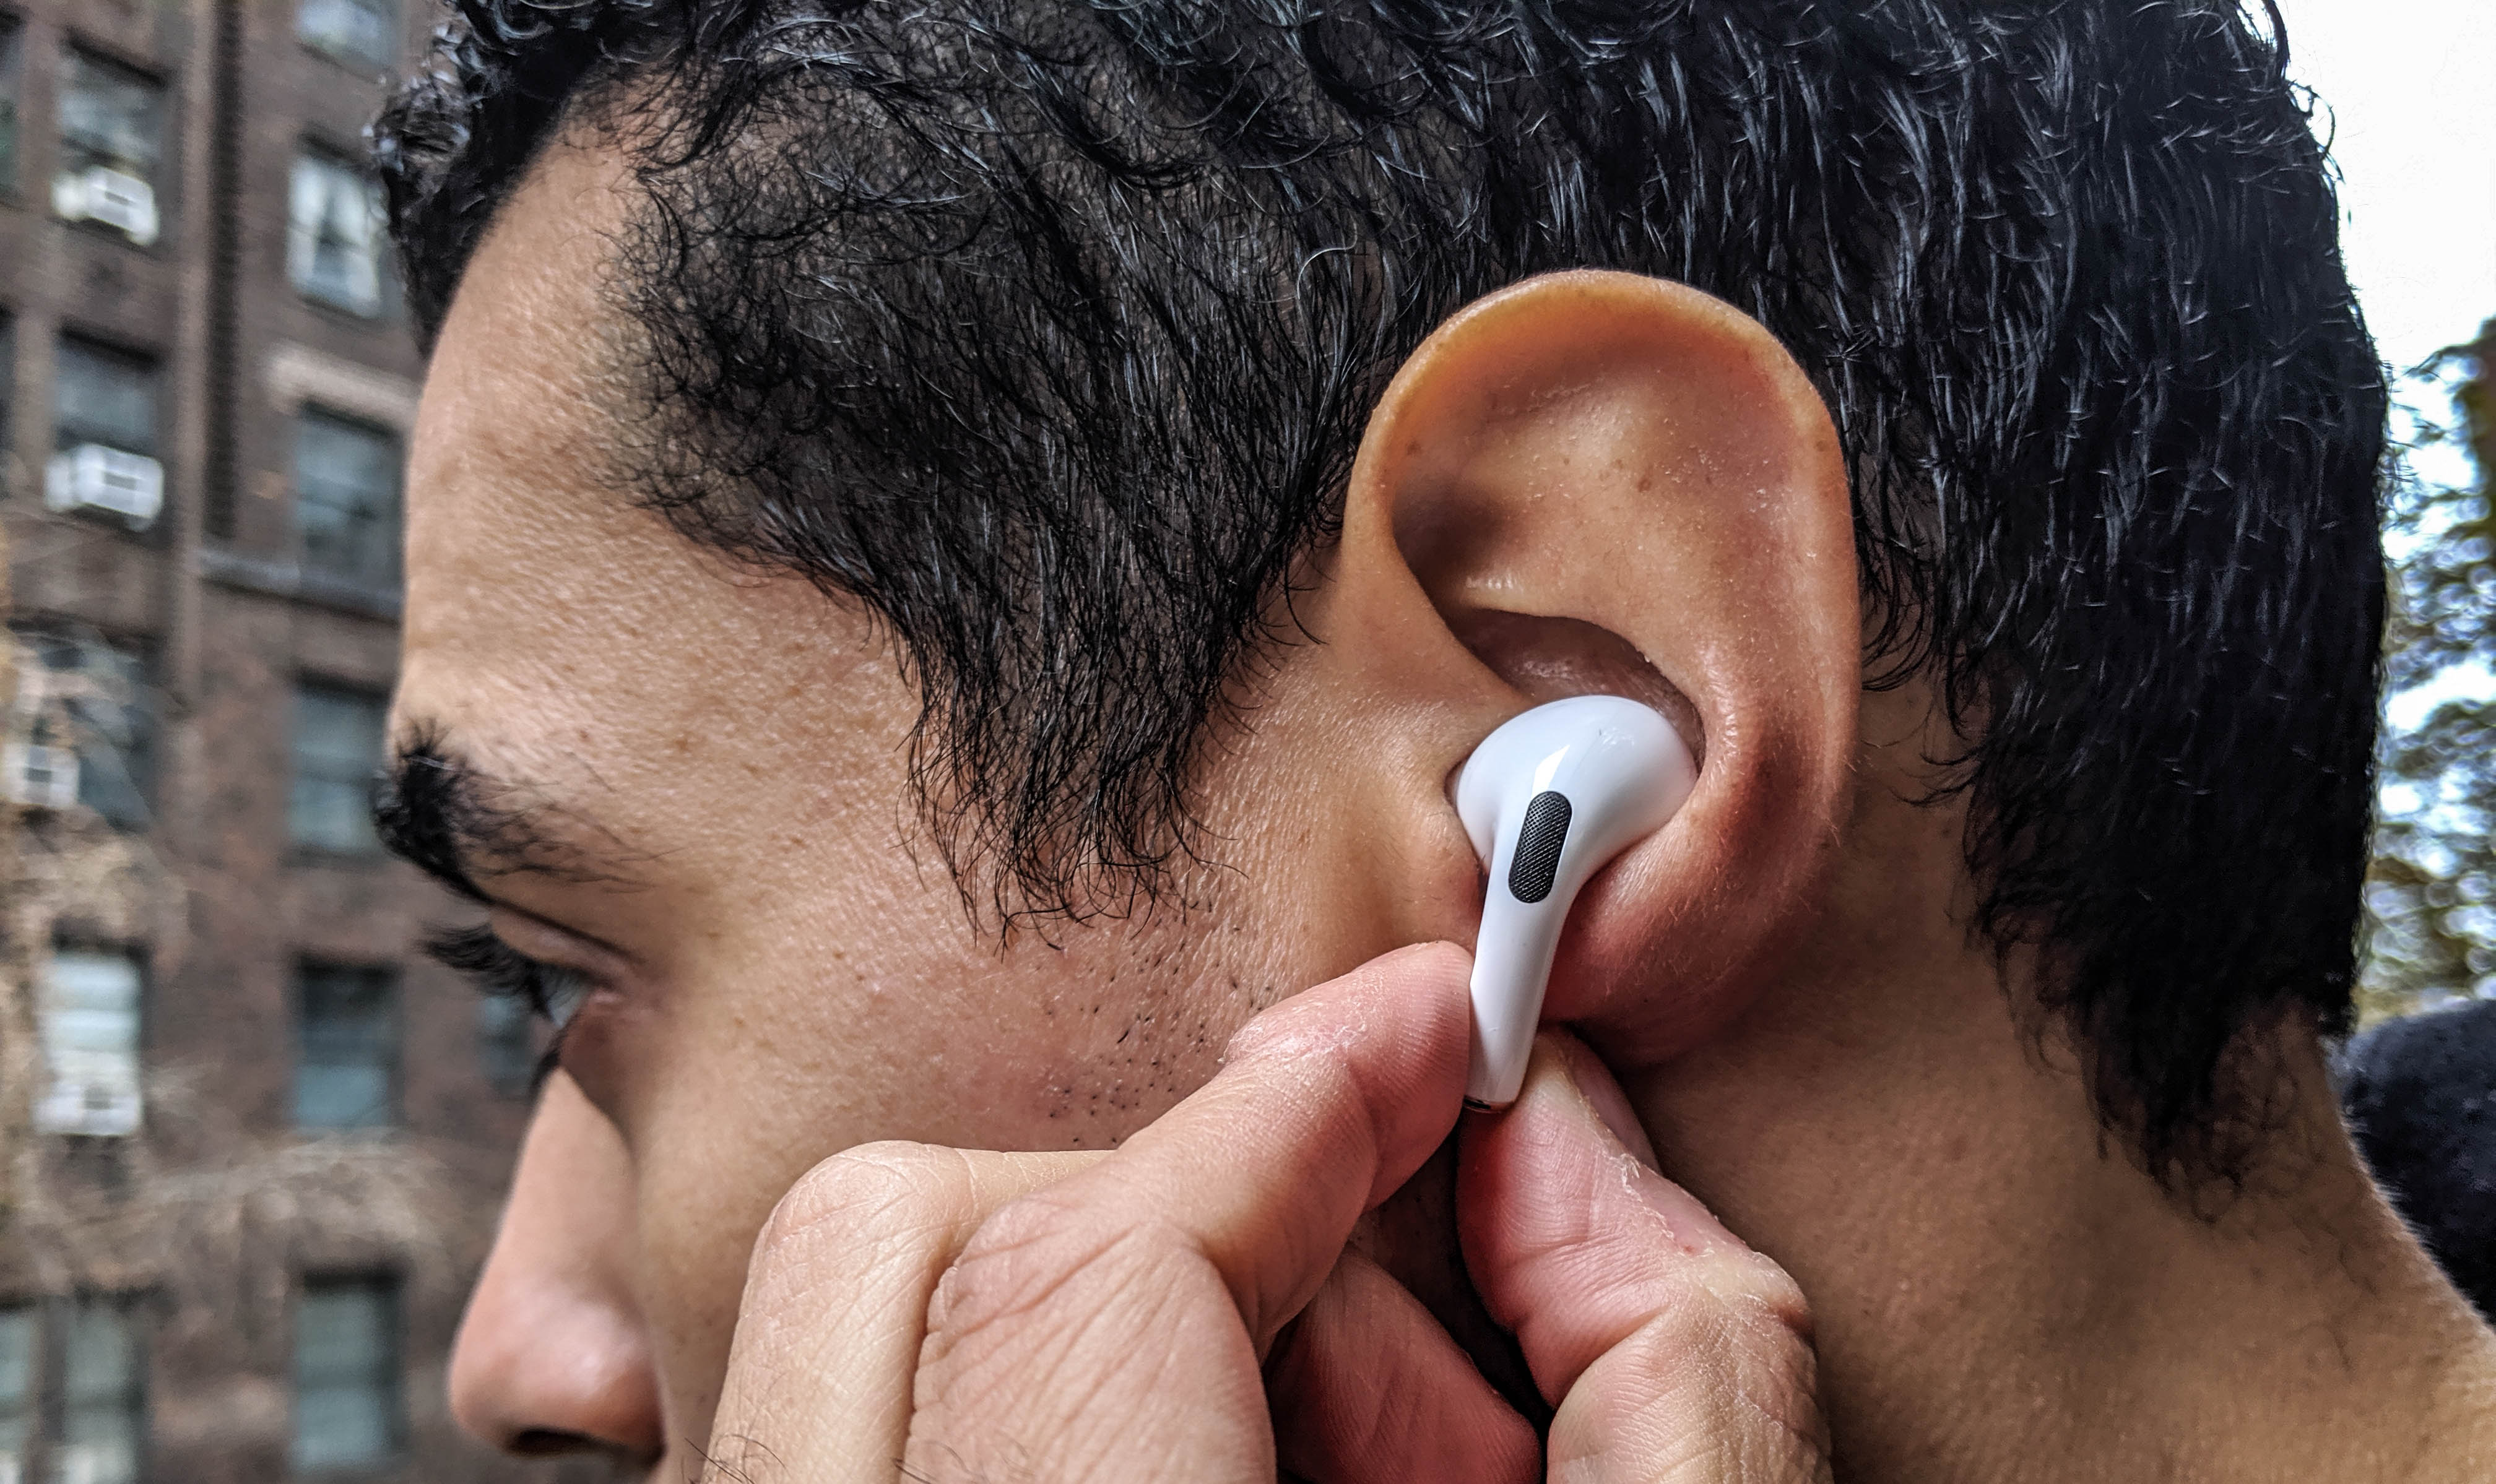 Our reviewer testing the AirPods Pro's force sensors